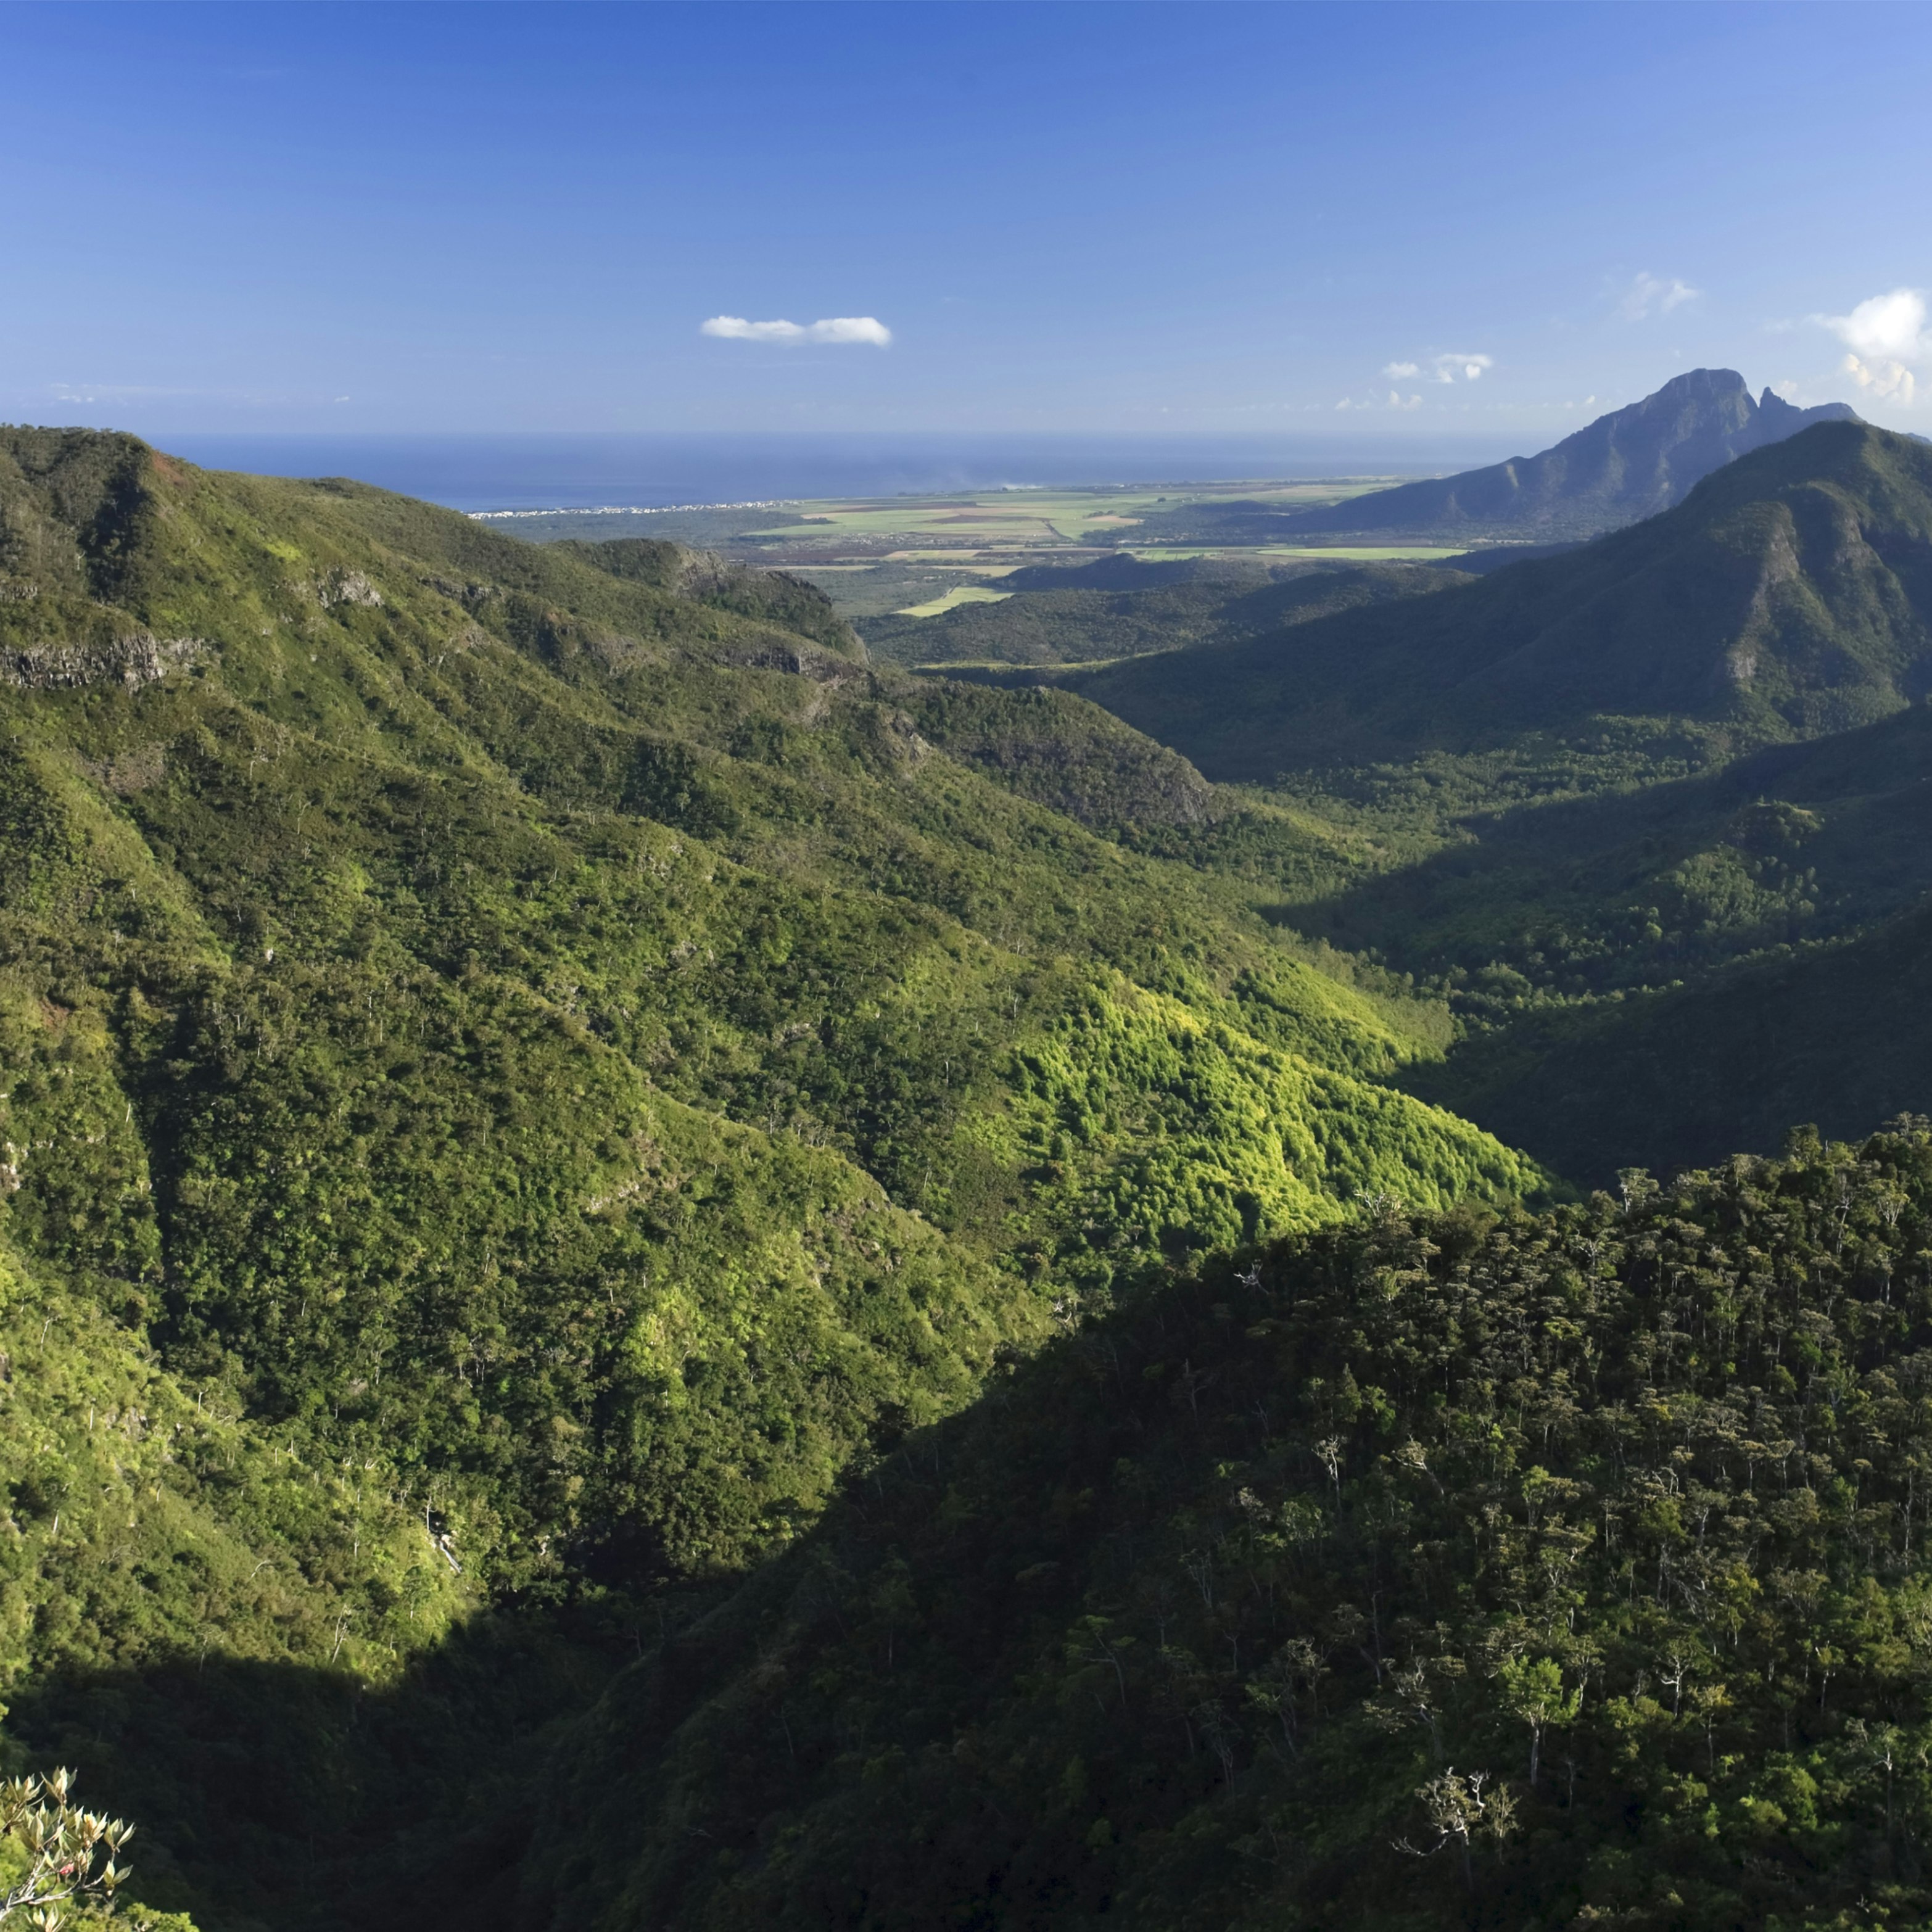 Mauritius, Black River Gorges National Park, Scenic view of mountains